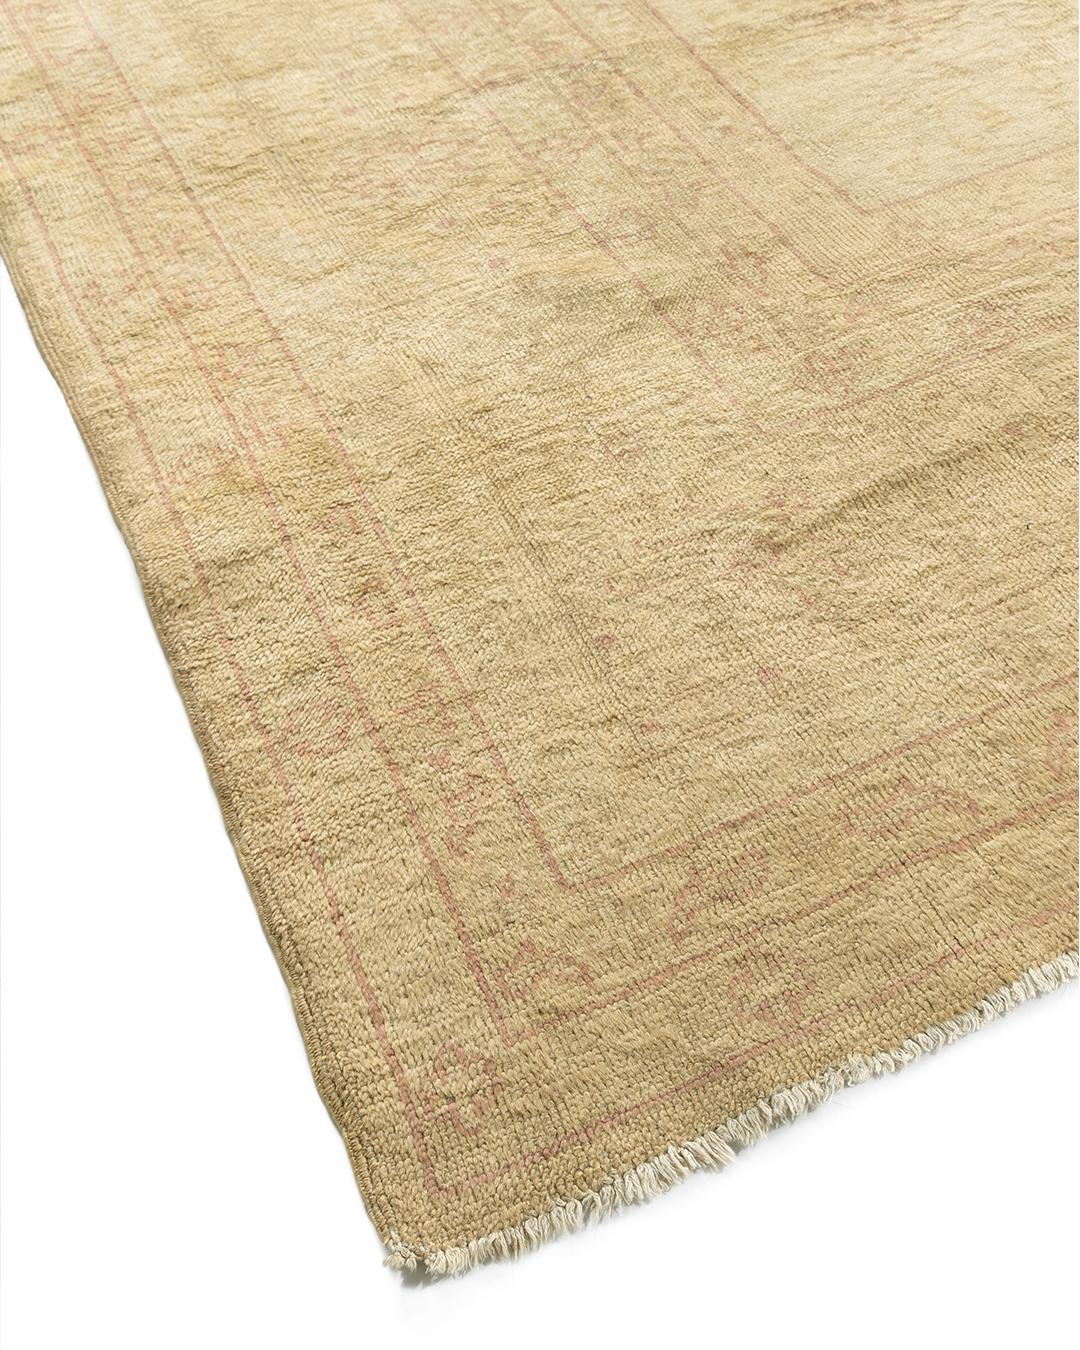 Hand-Woven Antique Turkish Oushak Rug, 13' x 16' For Sale